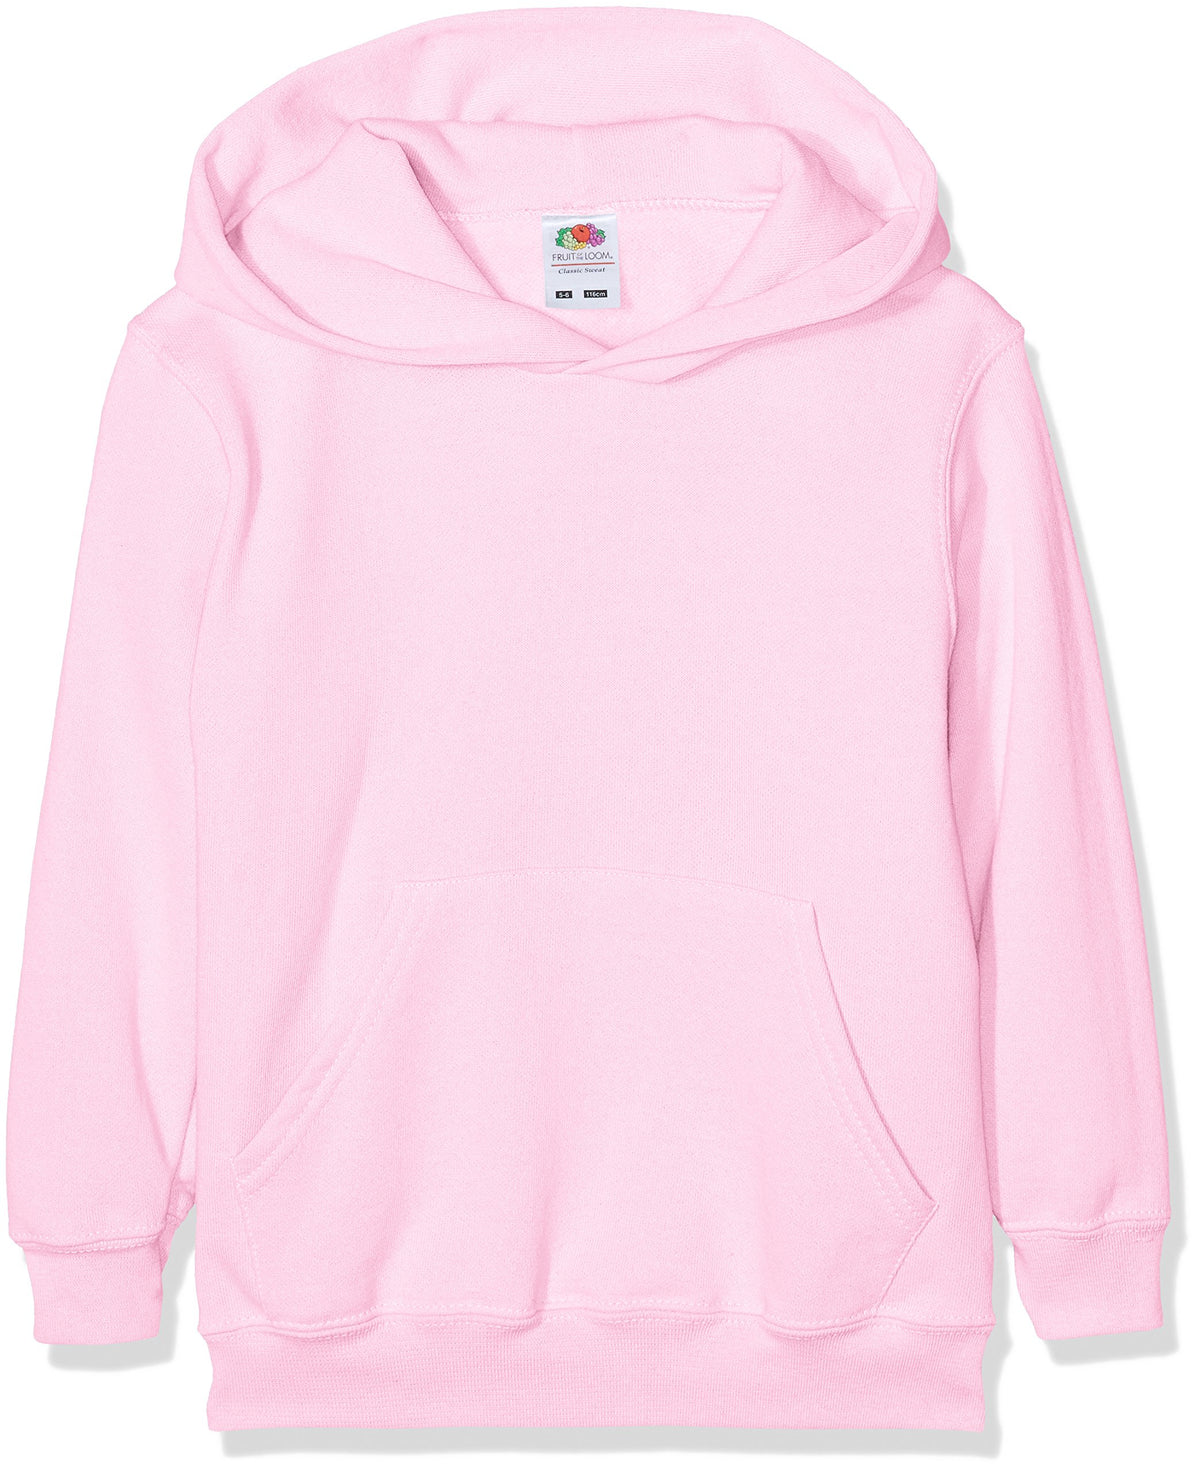 Fruit of the Loom Boys Pull-over Classic Pull-over Long Sleeve Hooded Sweat, Light Pink, 14-15 Years (Manufacturer Size: 164)